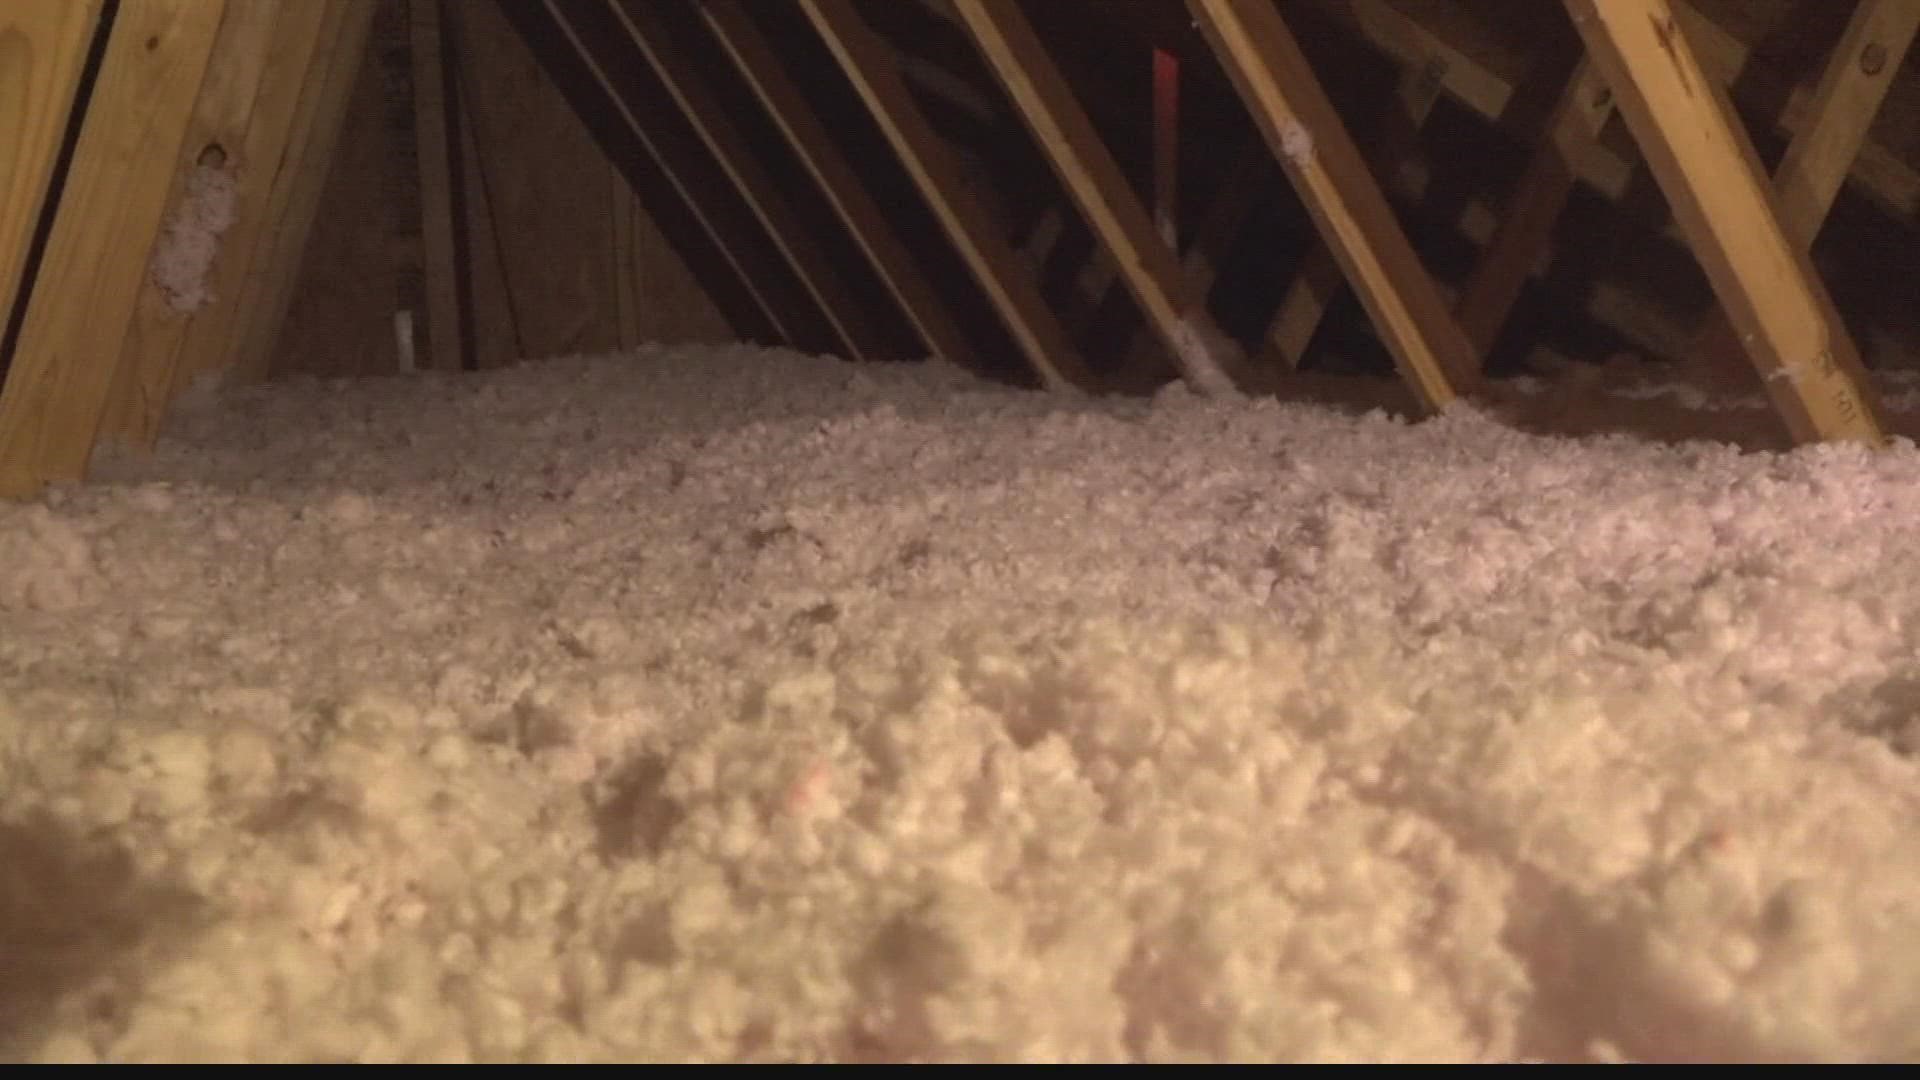 Adding insulation to your attic can help your home to stay much cooler when it is hot outside. It can also save you money on your energy bill.